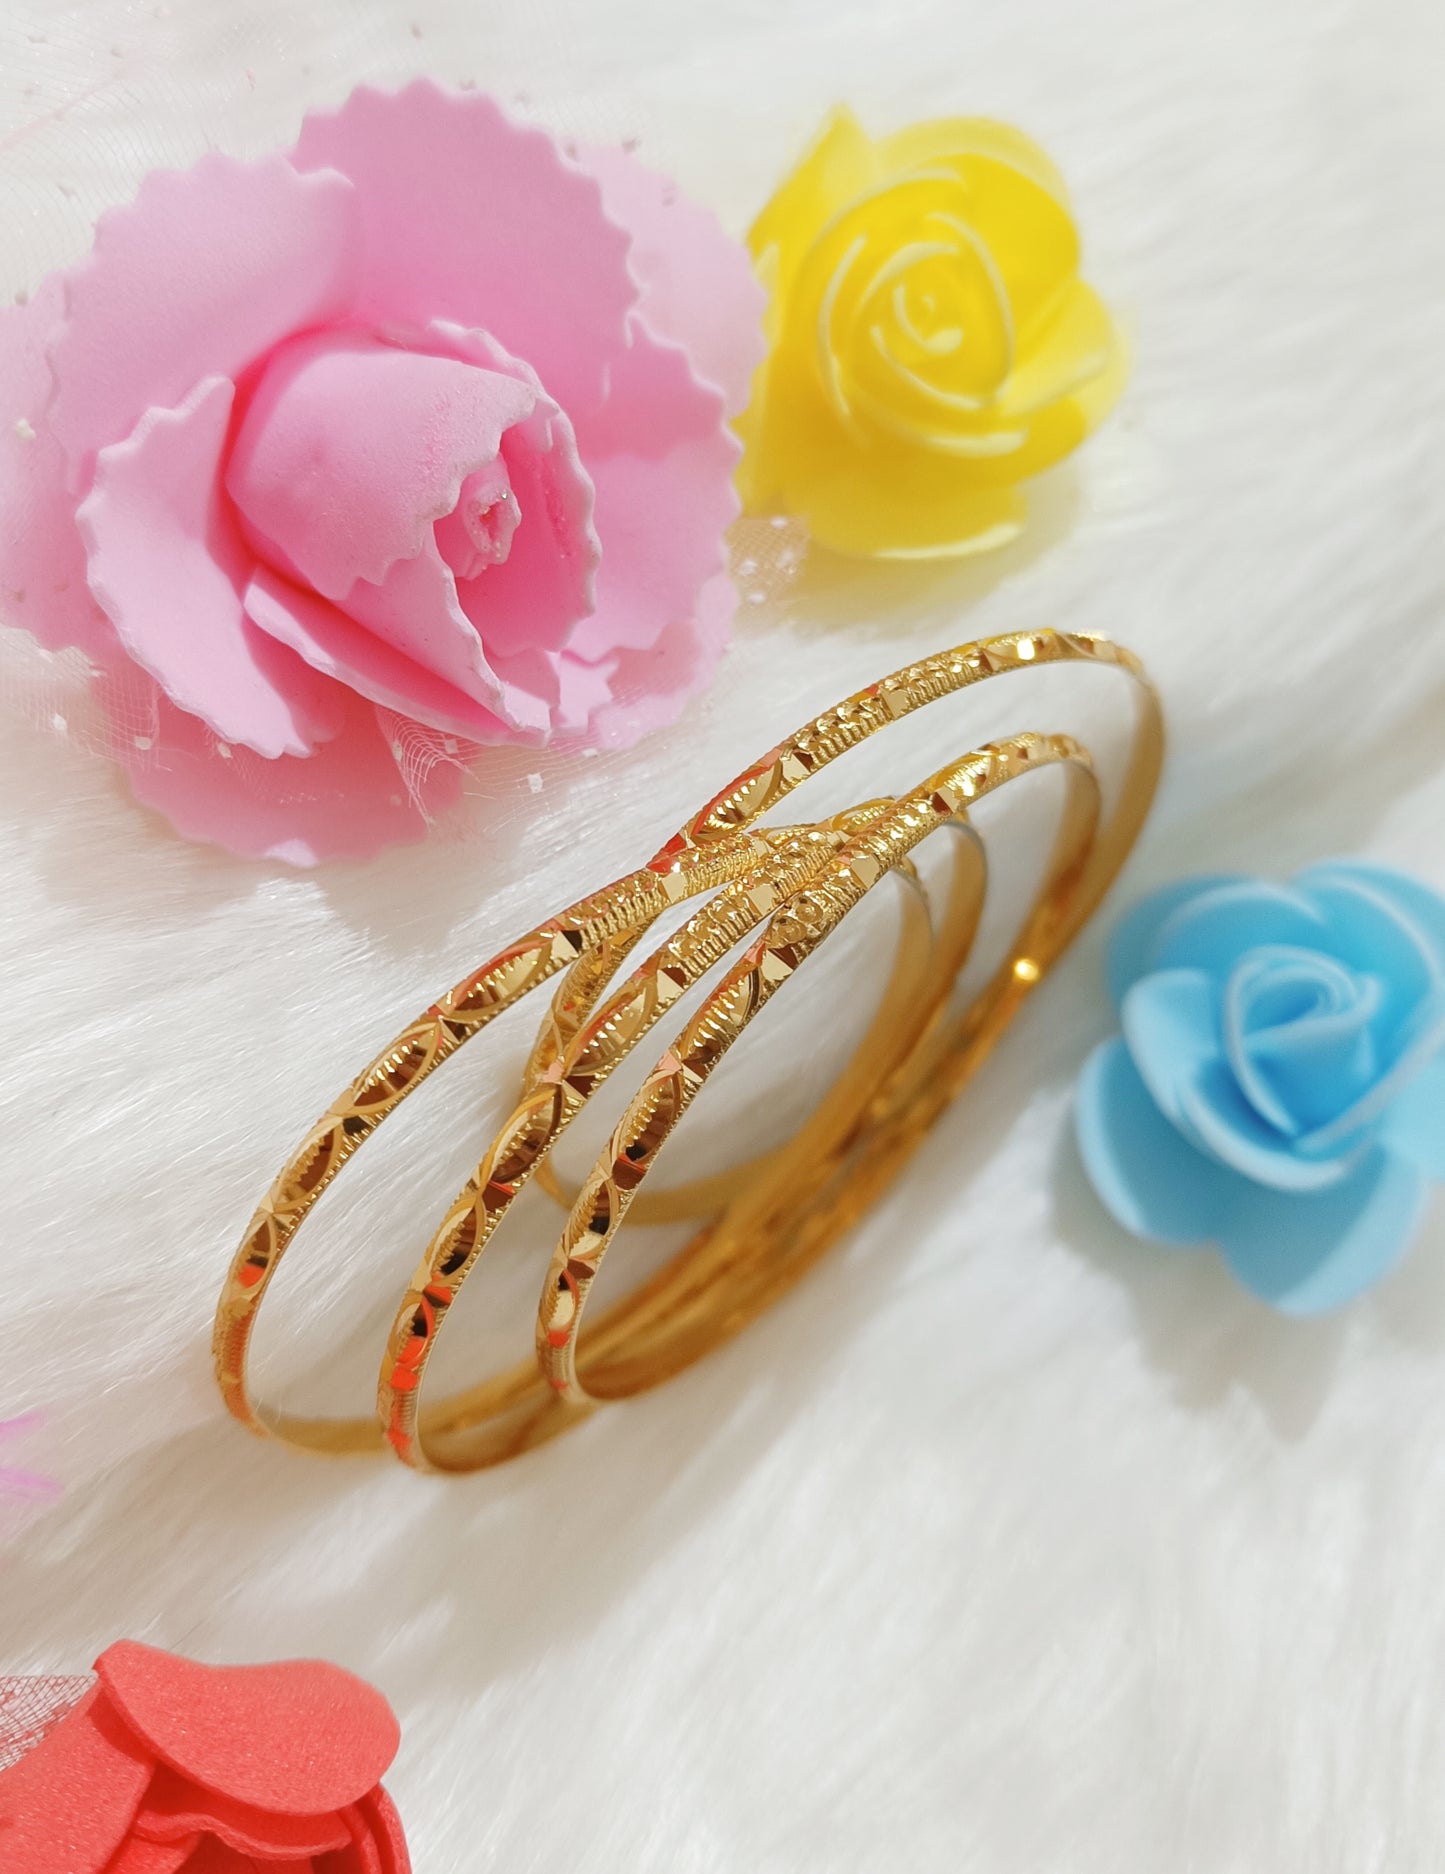 This gold plated bangles for women